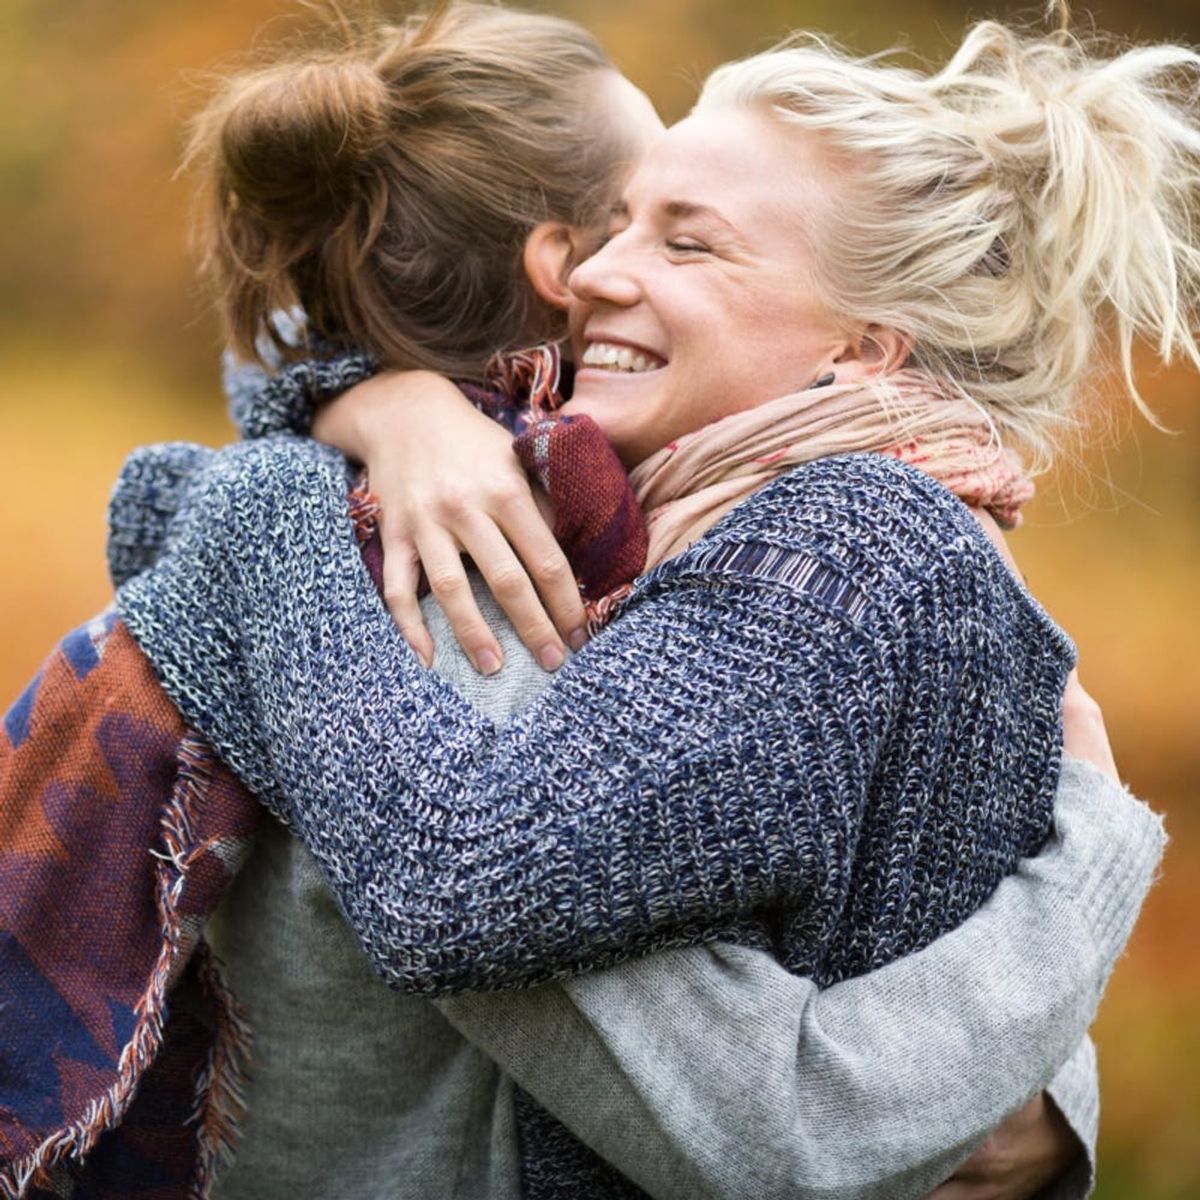 Here’s Scientific Proof That a Hug Can Improve Your Mood